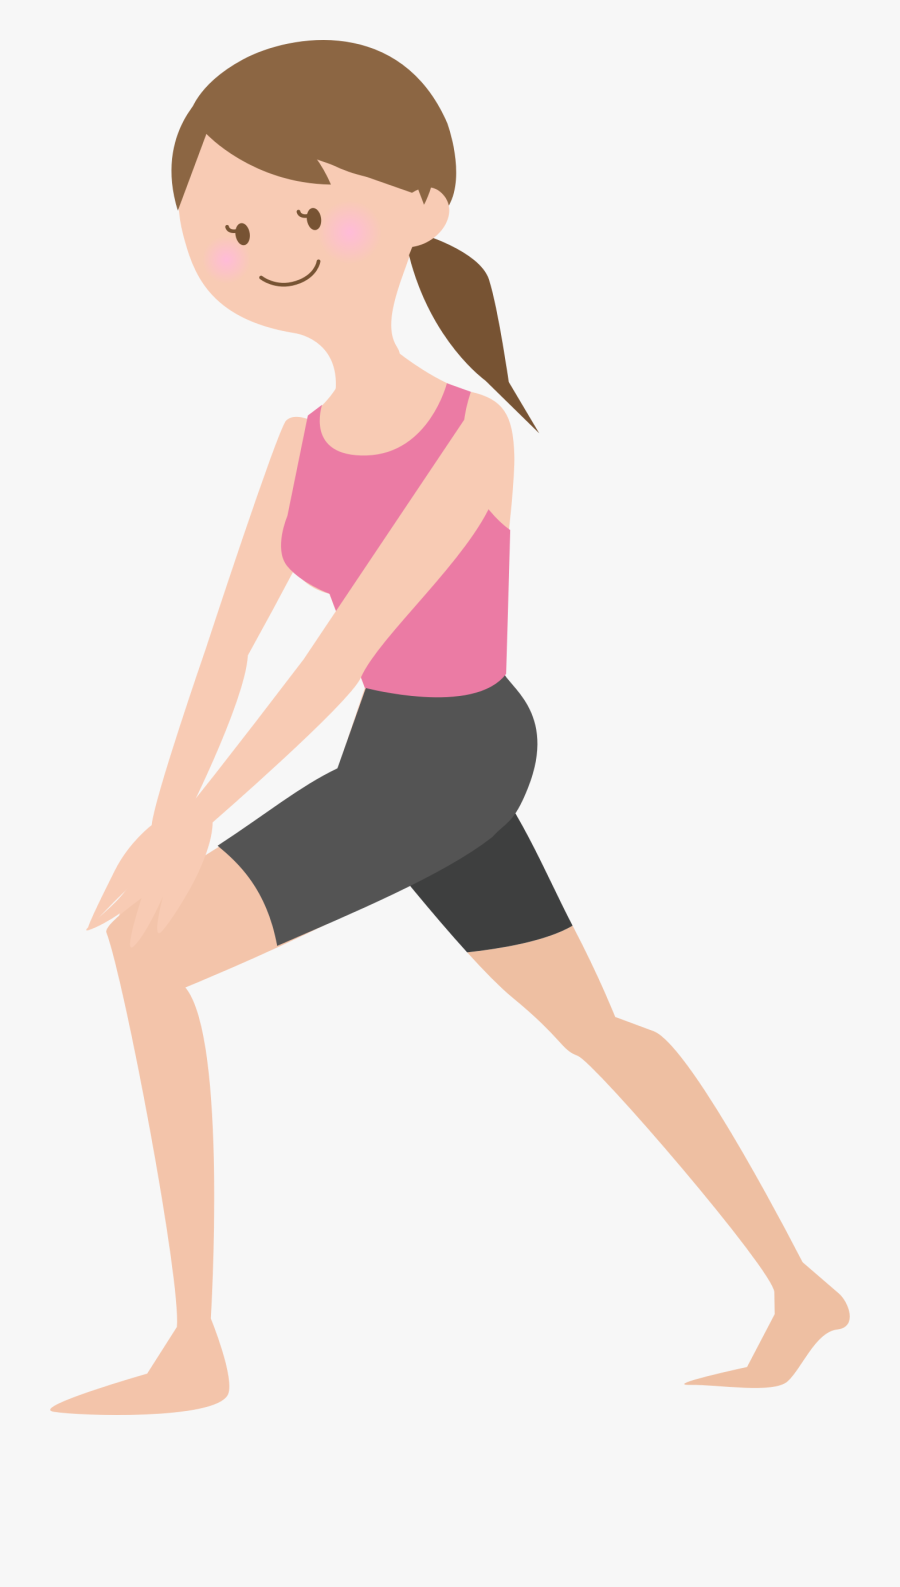 Thigh,arm,shoe - Exercise Lady Cartoon Png, Transparent Clipart